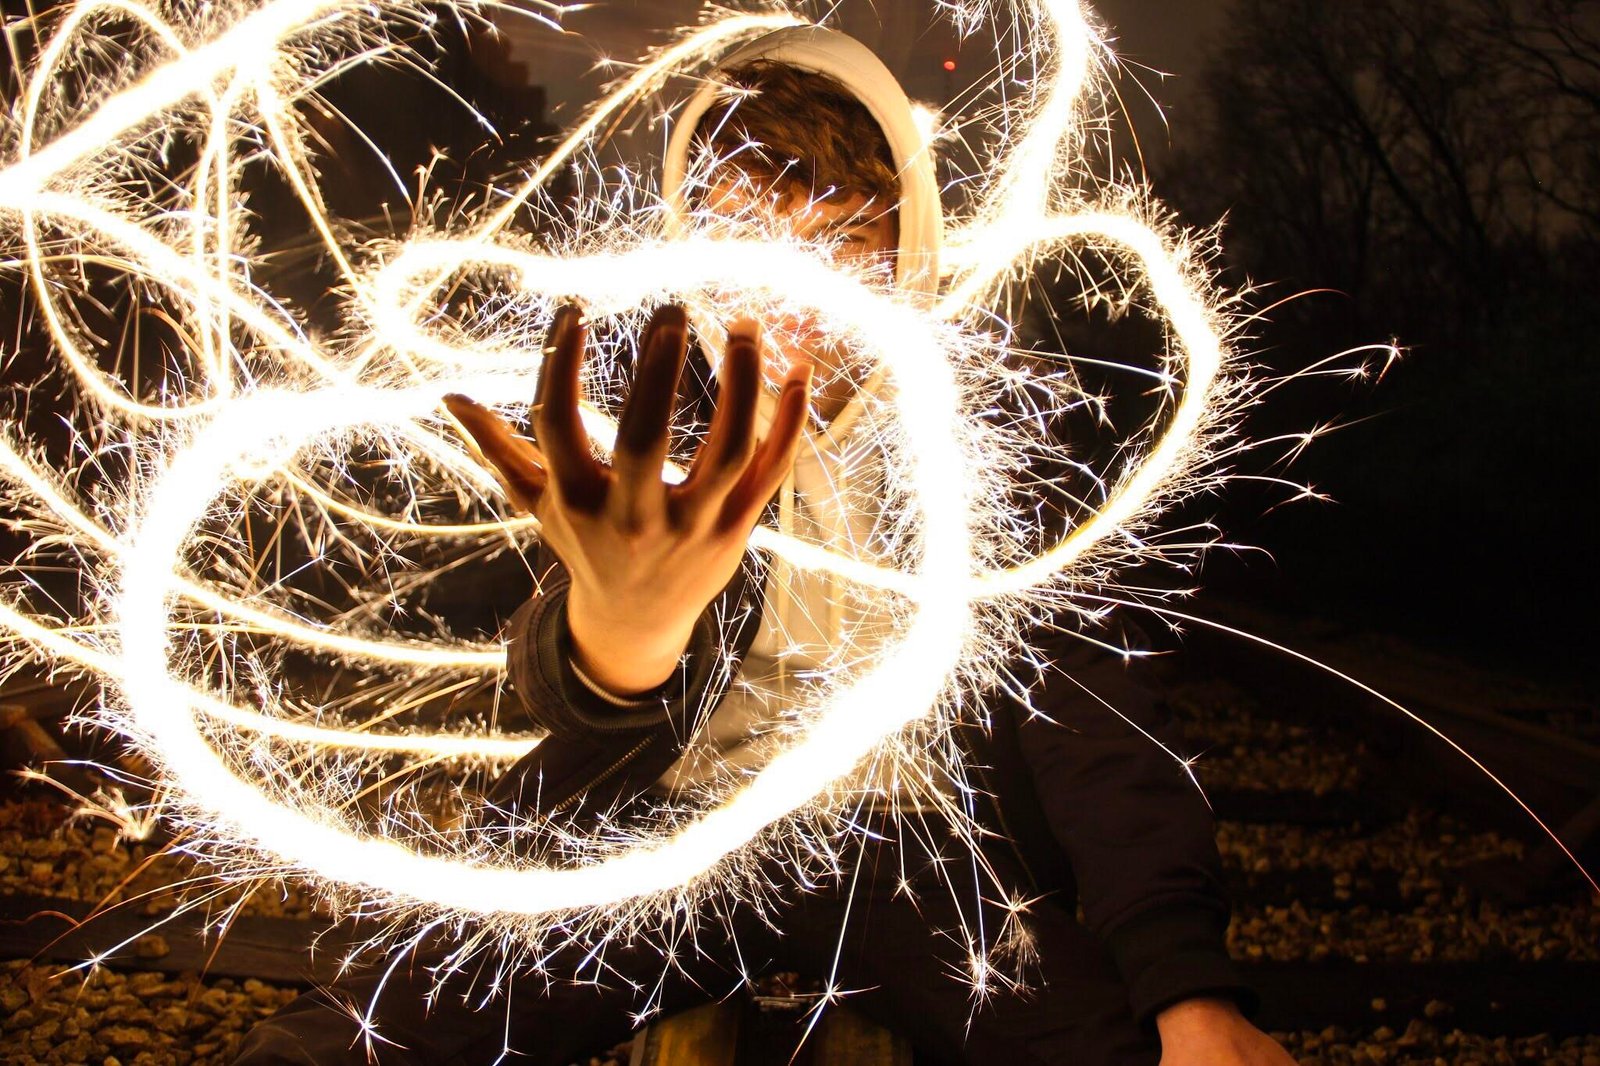 How To Take Sparkler Pictures With an iPhone?